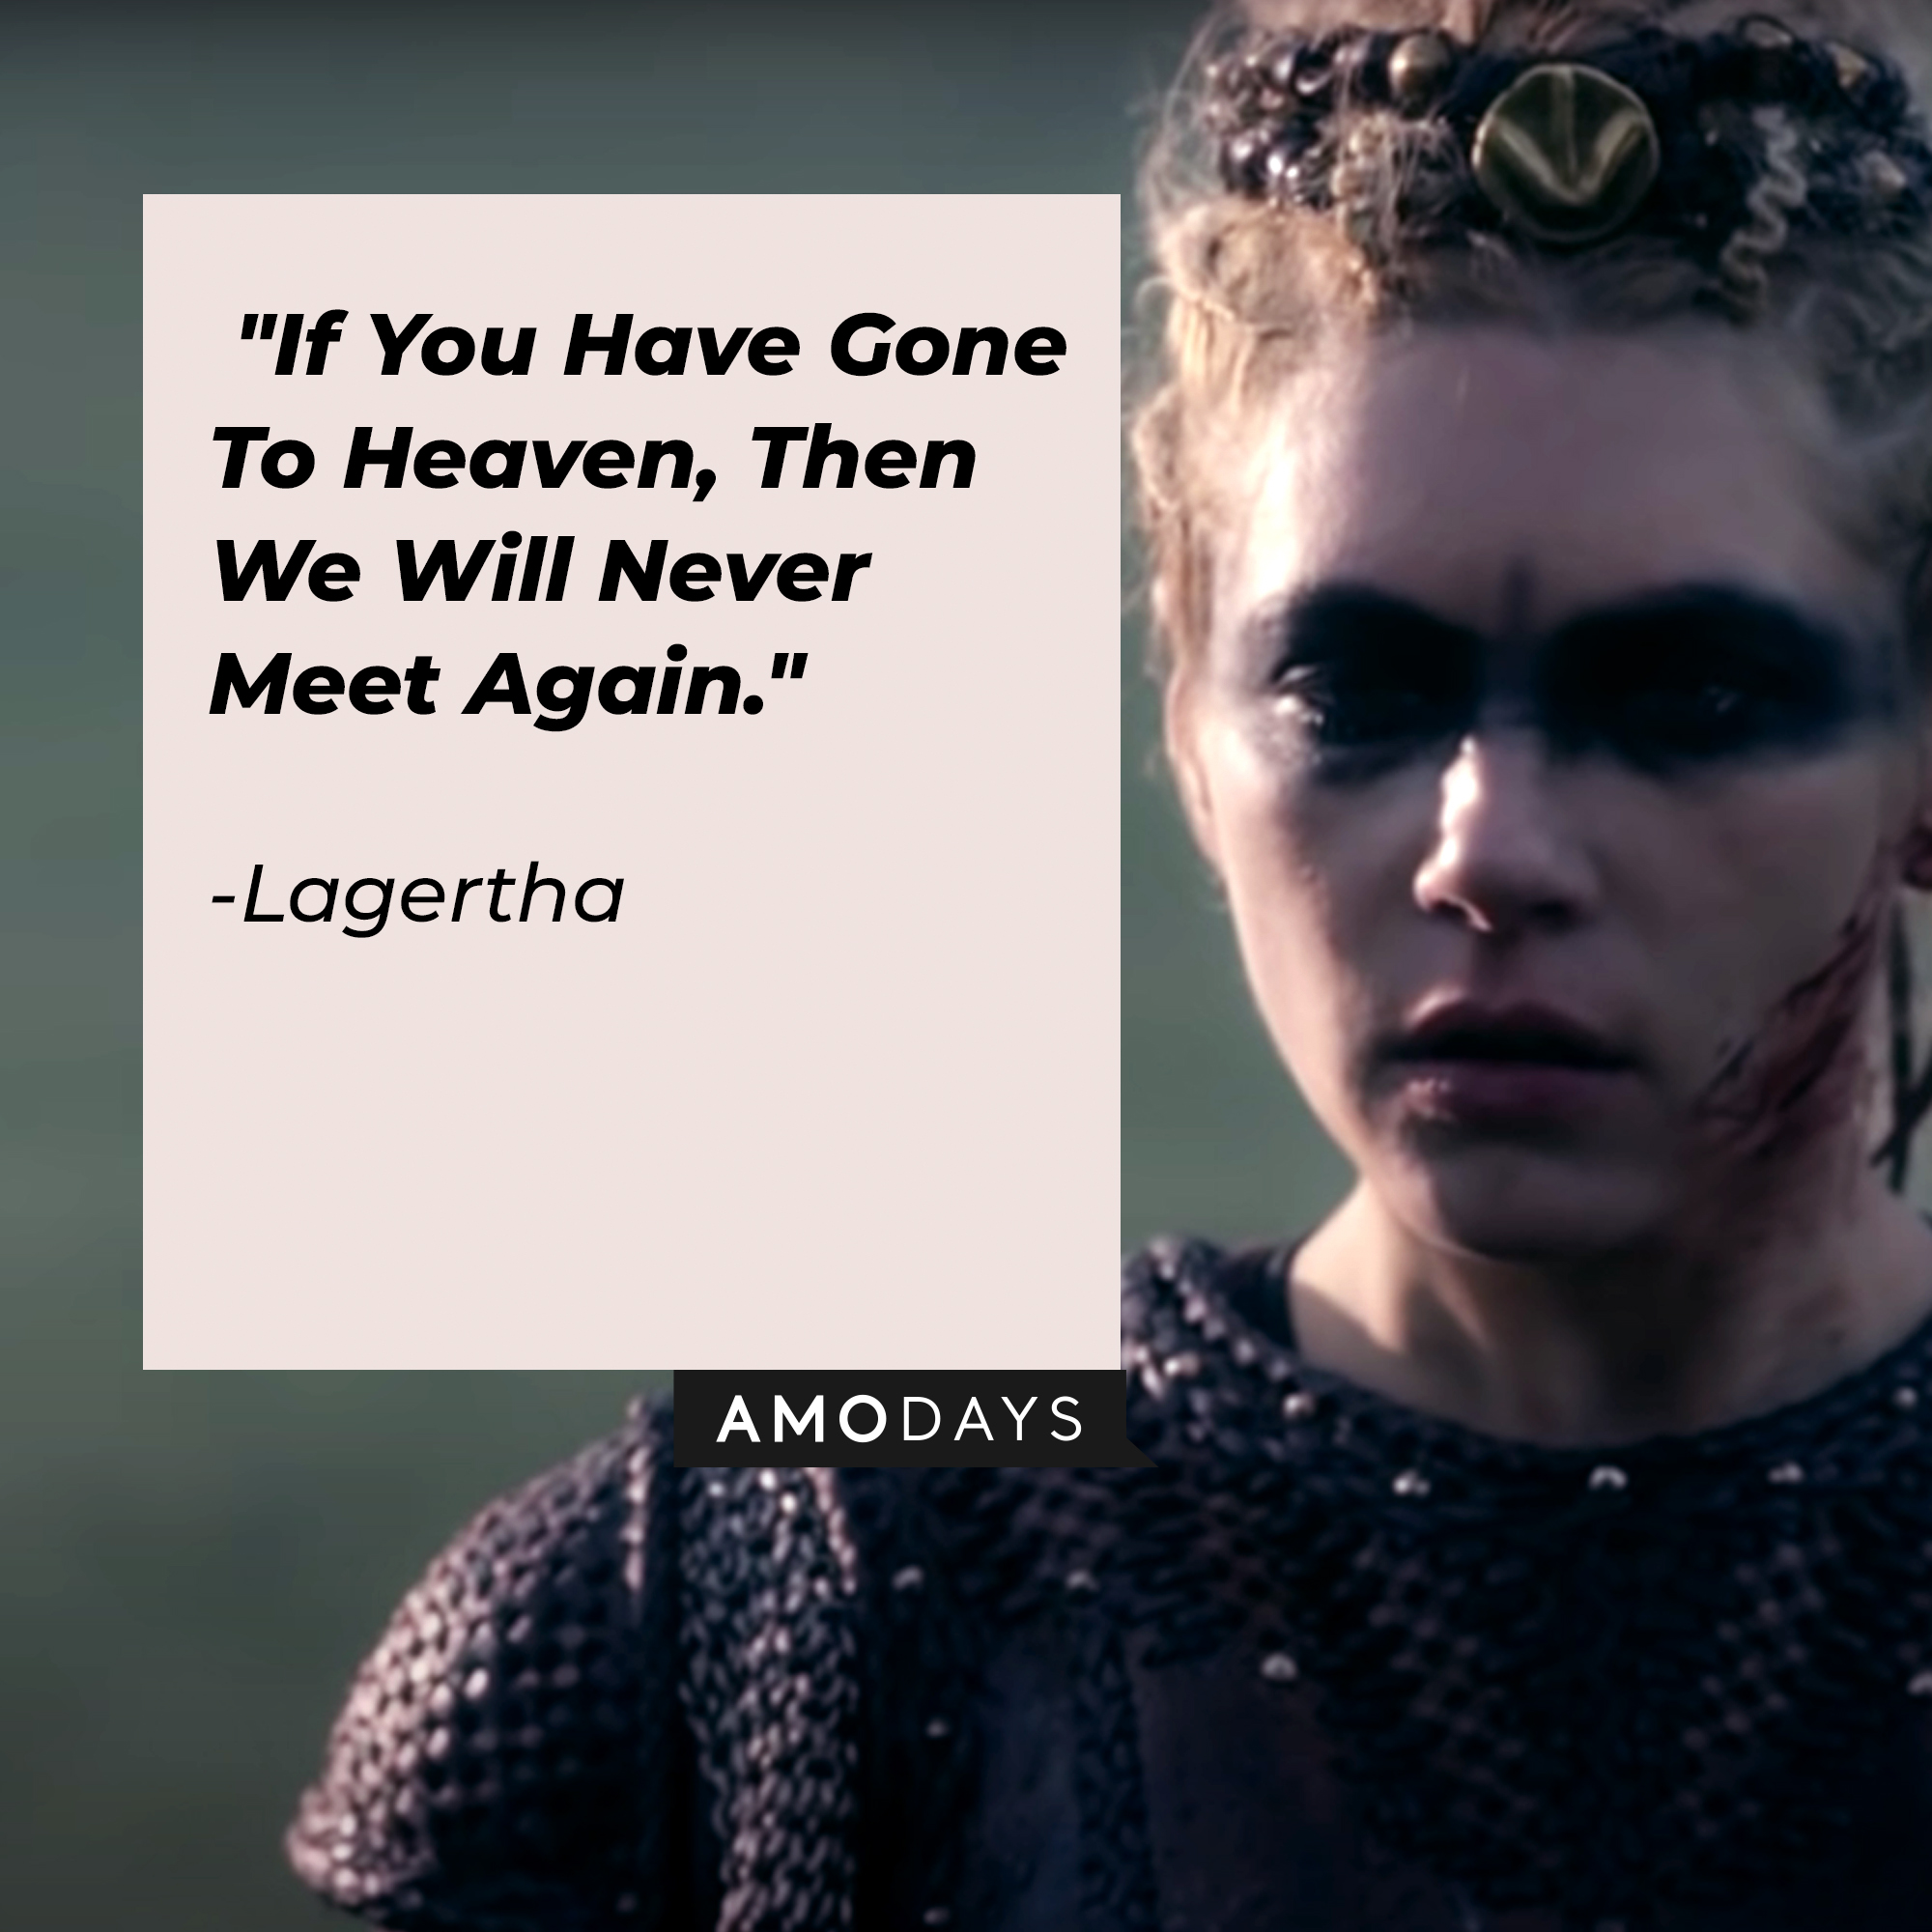 Lagertha's quote: "If You Have Gone To Heaven, Then We Will Never Meet Again." | Source: youtube.com/PrimeVideoUK